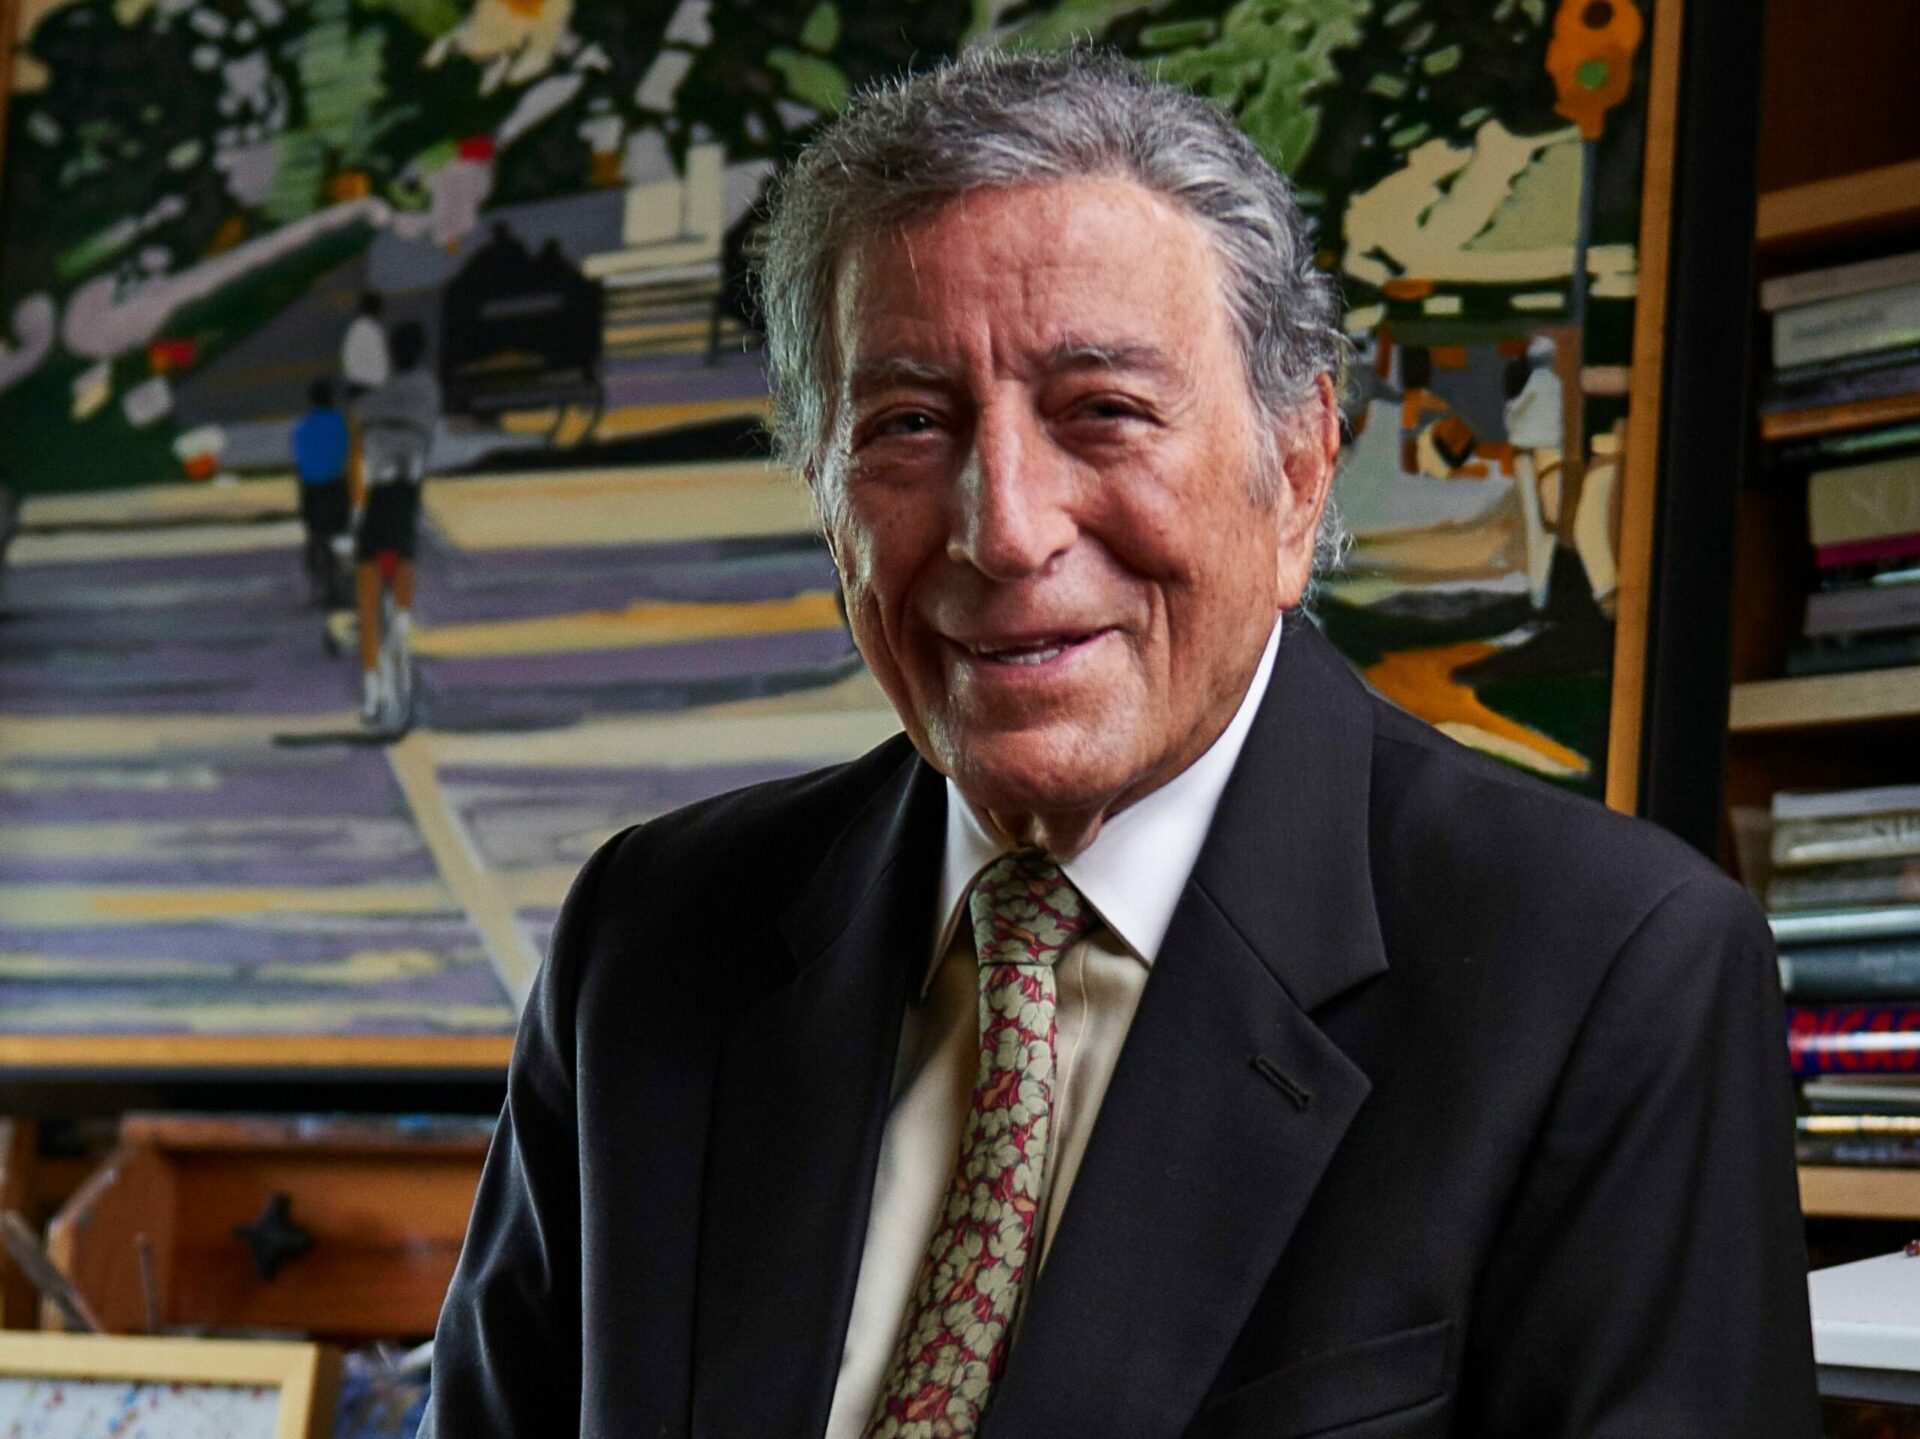 Tony Bennett, timeless singer who won over fans for decades, dies at 96 ...